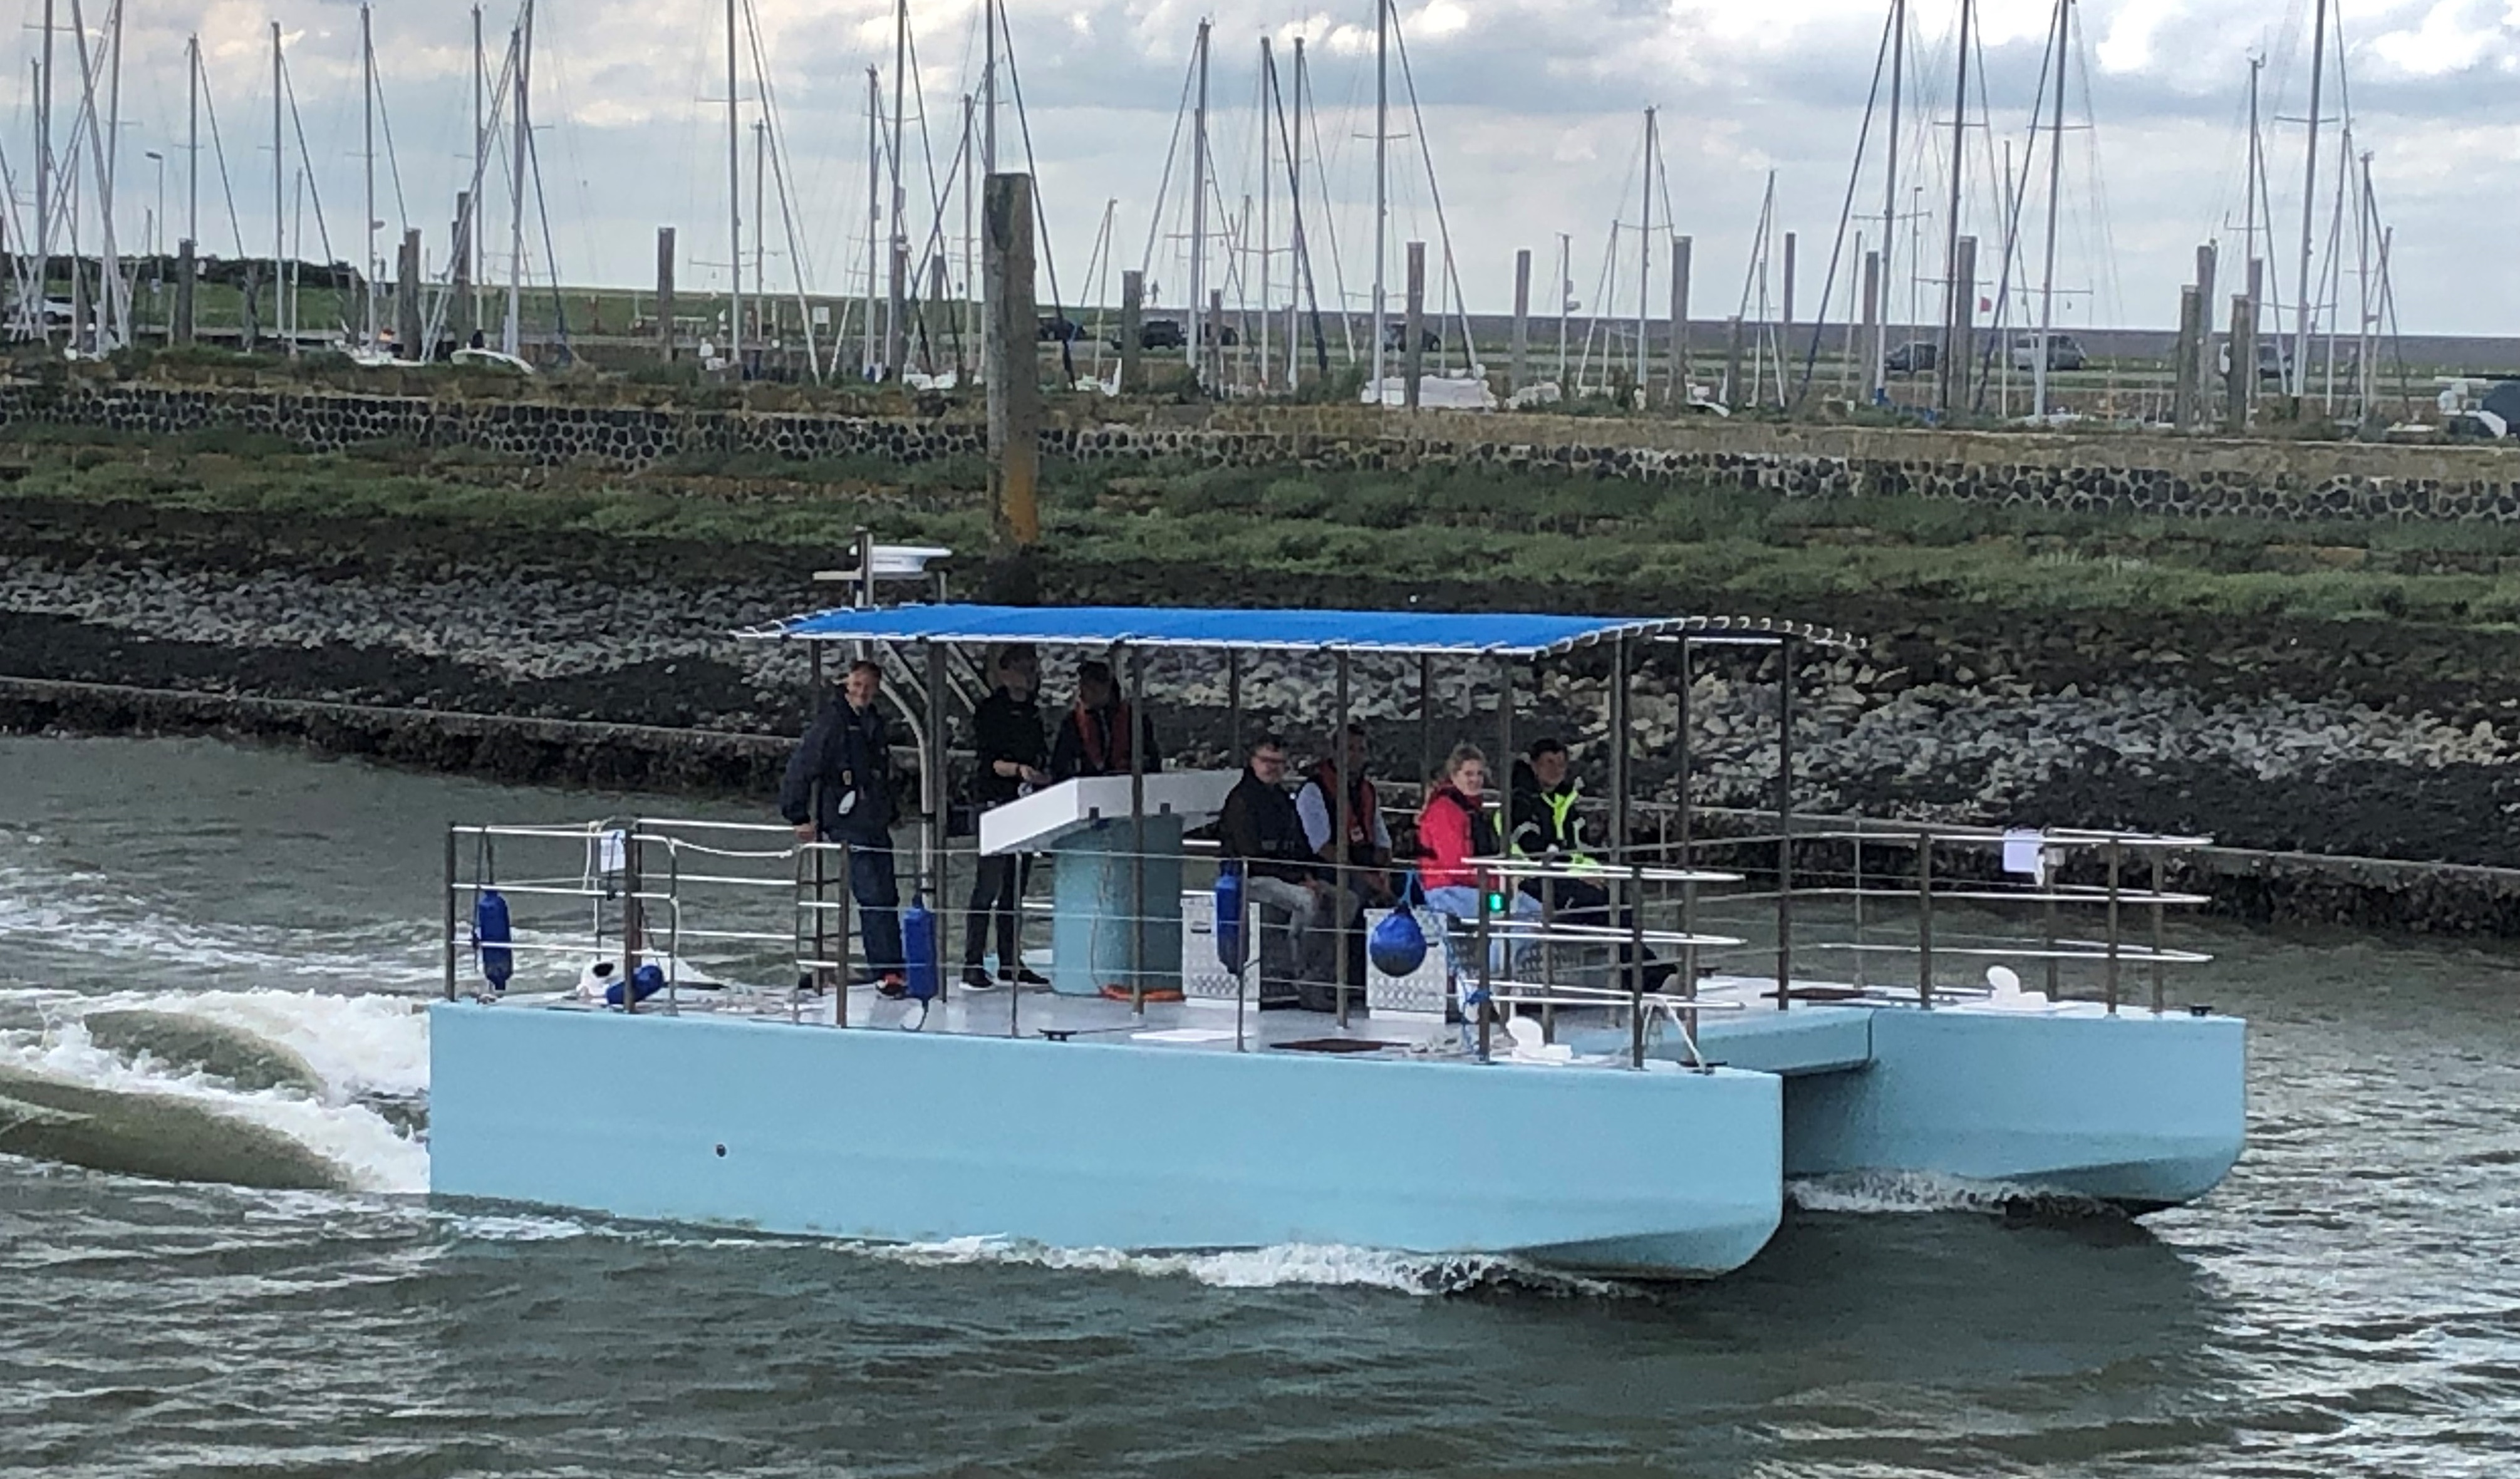 Transfer of the emission-free Water Taxi